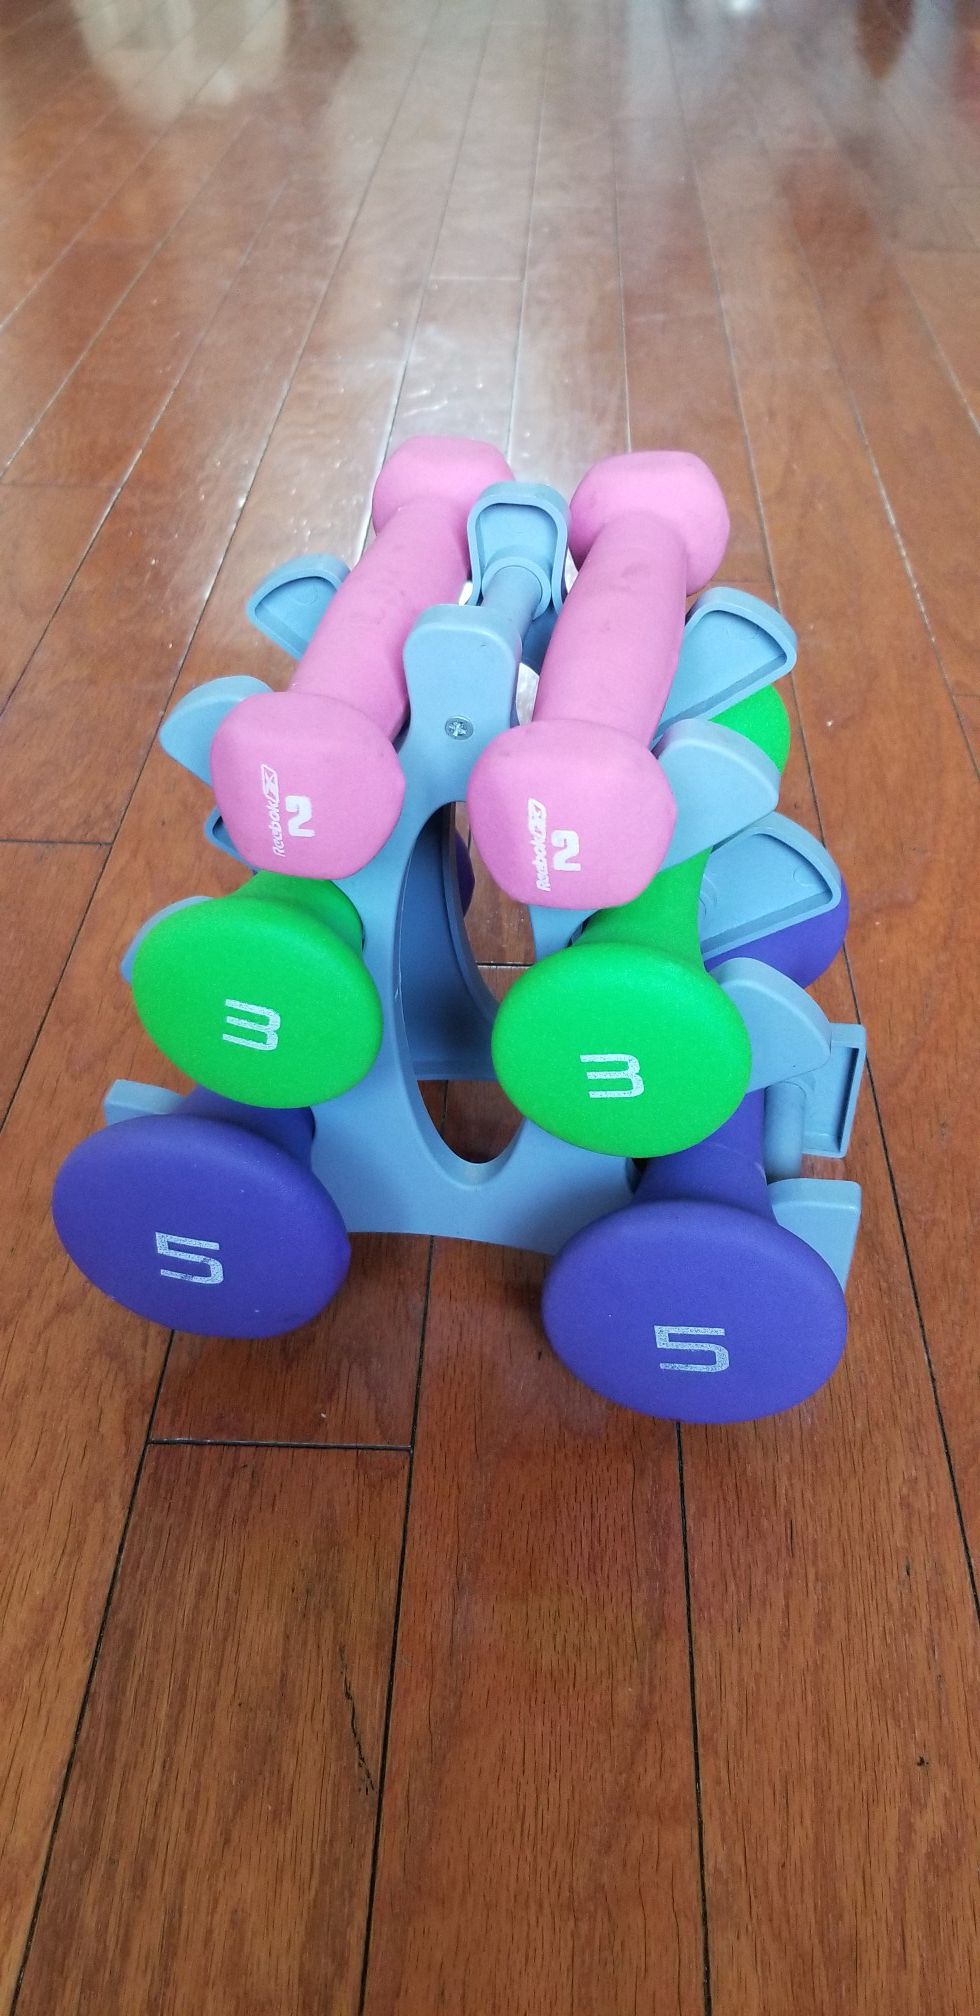 Dumbbell Set with Rack (2lb, 3lb, 5lb Weights)